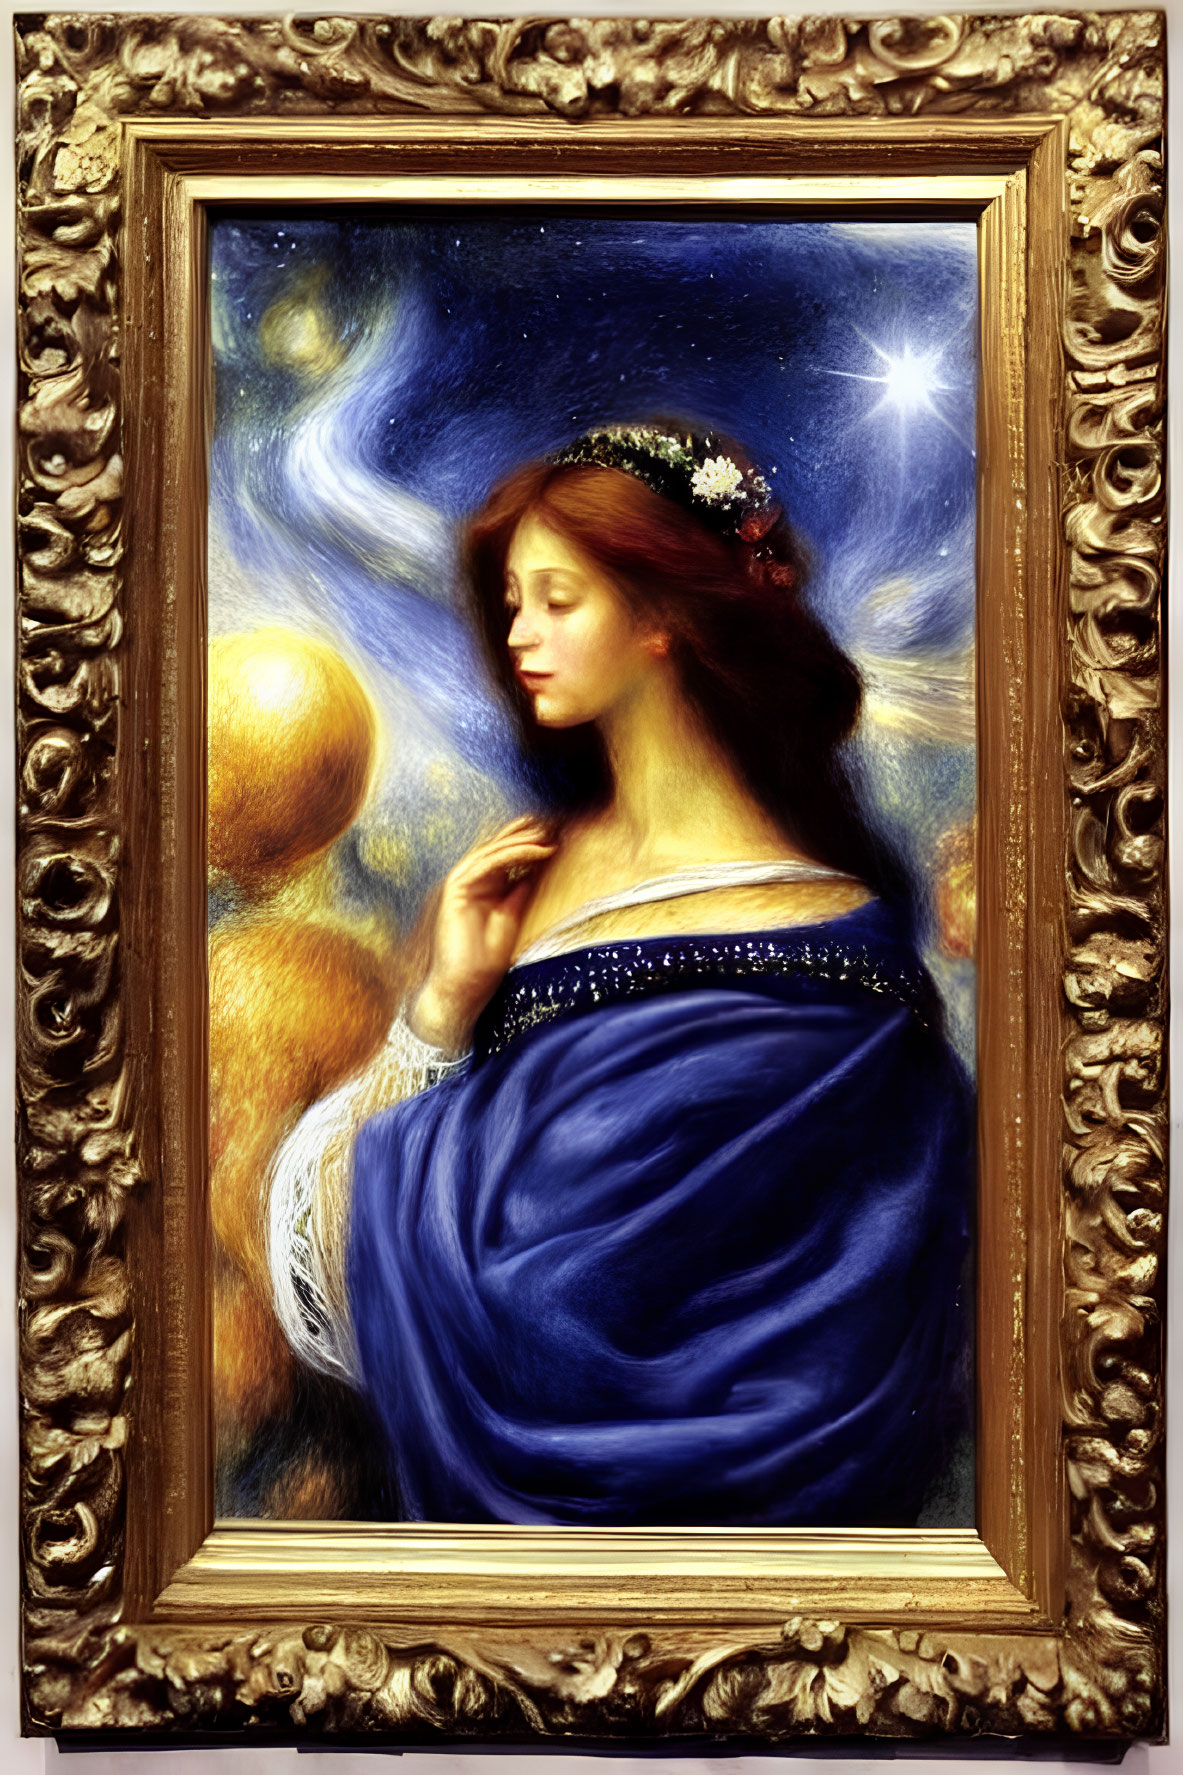 Golden framed painting of woman in blue dress with celestial hair and glowing orb